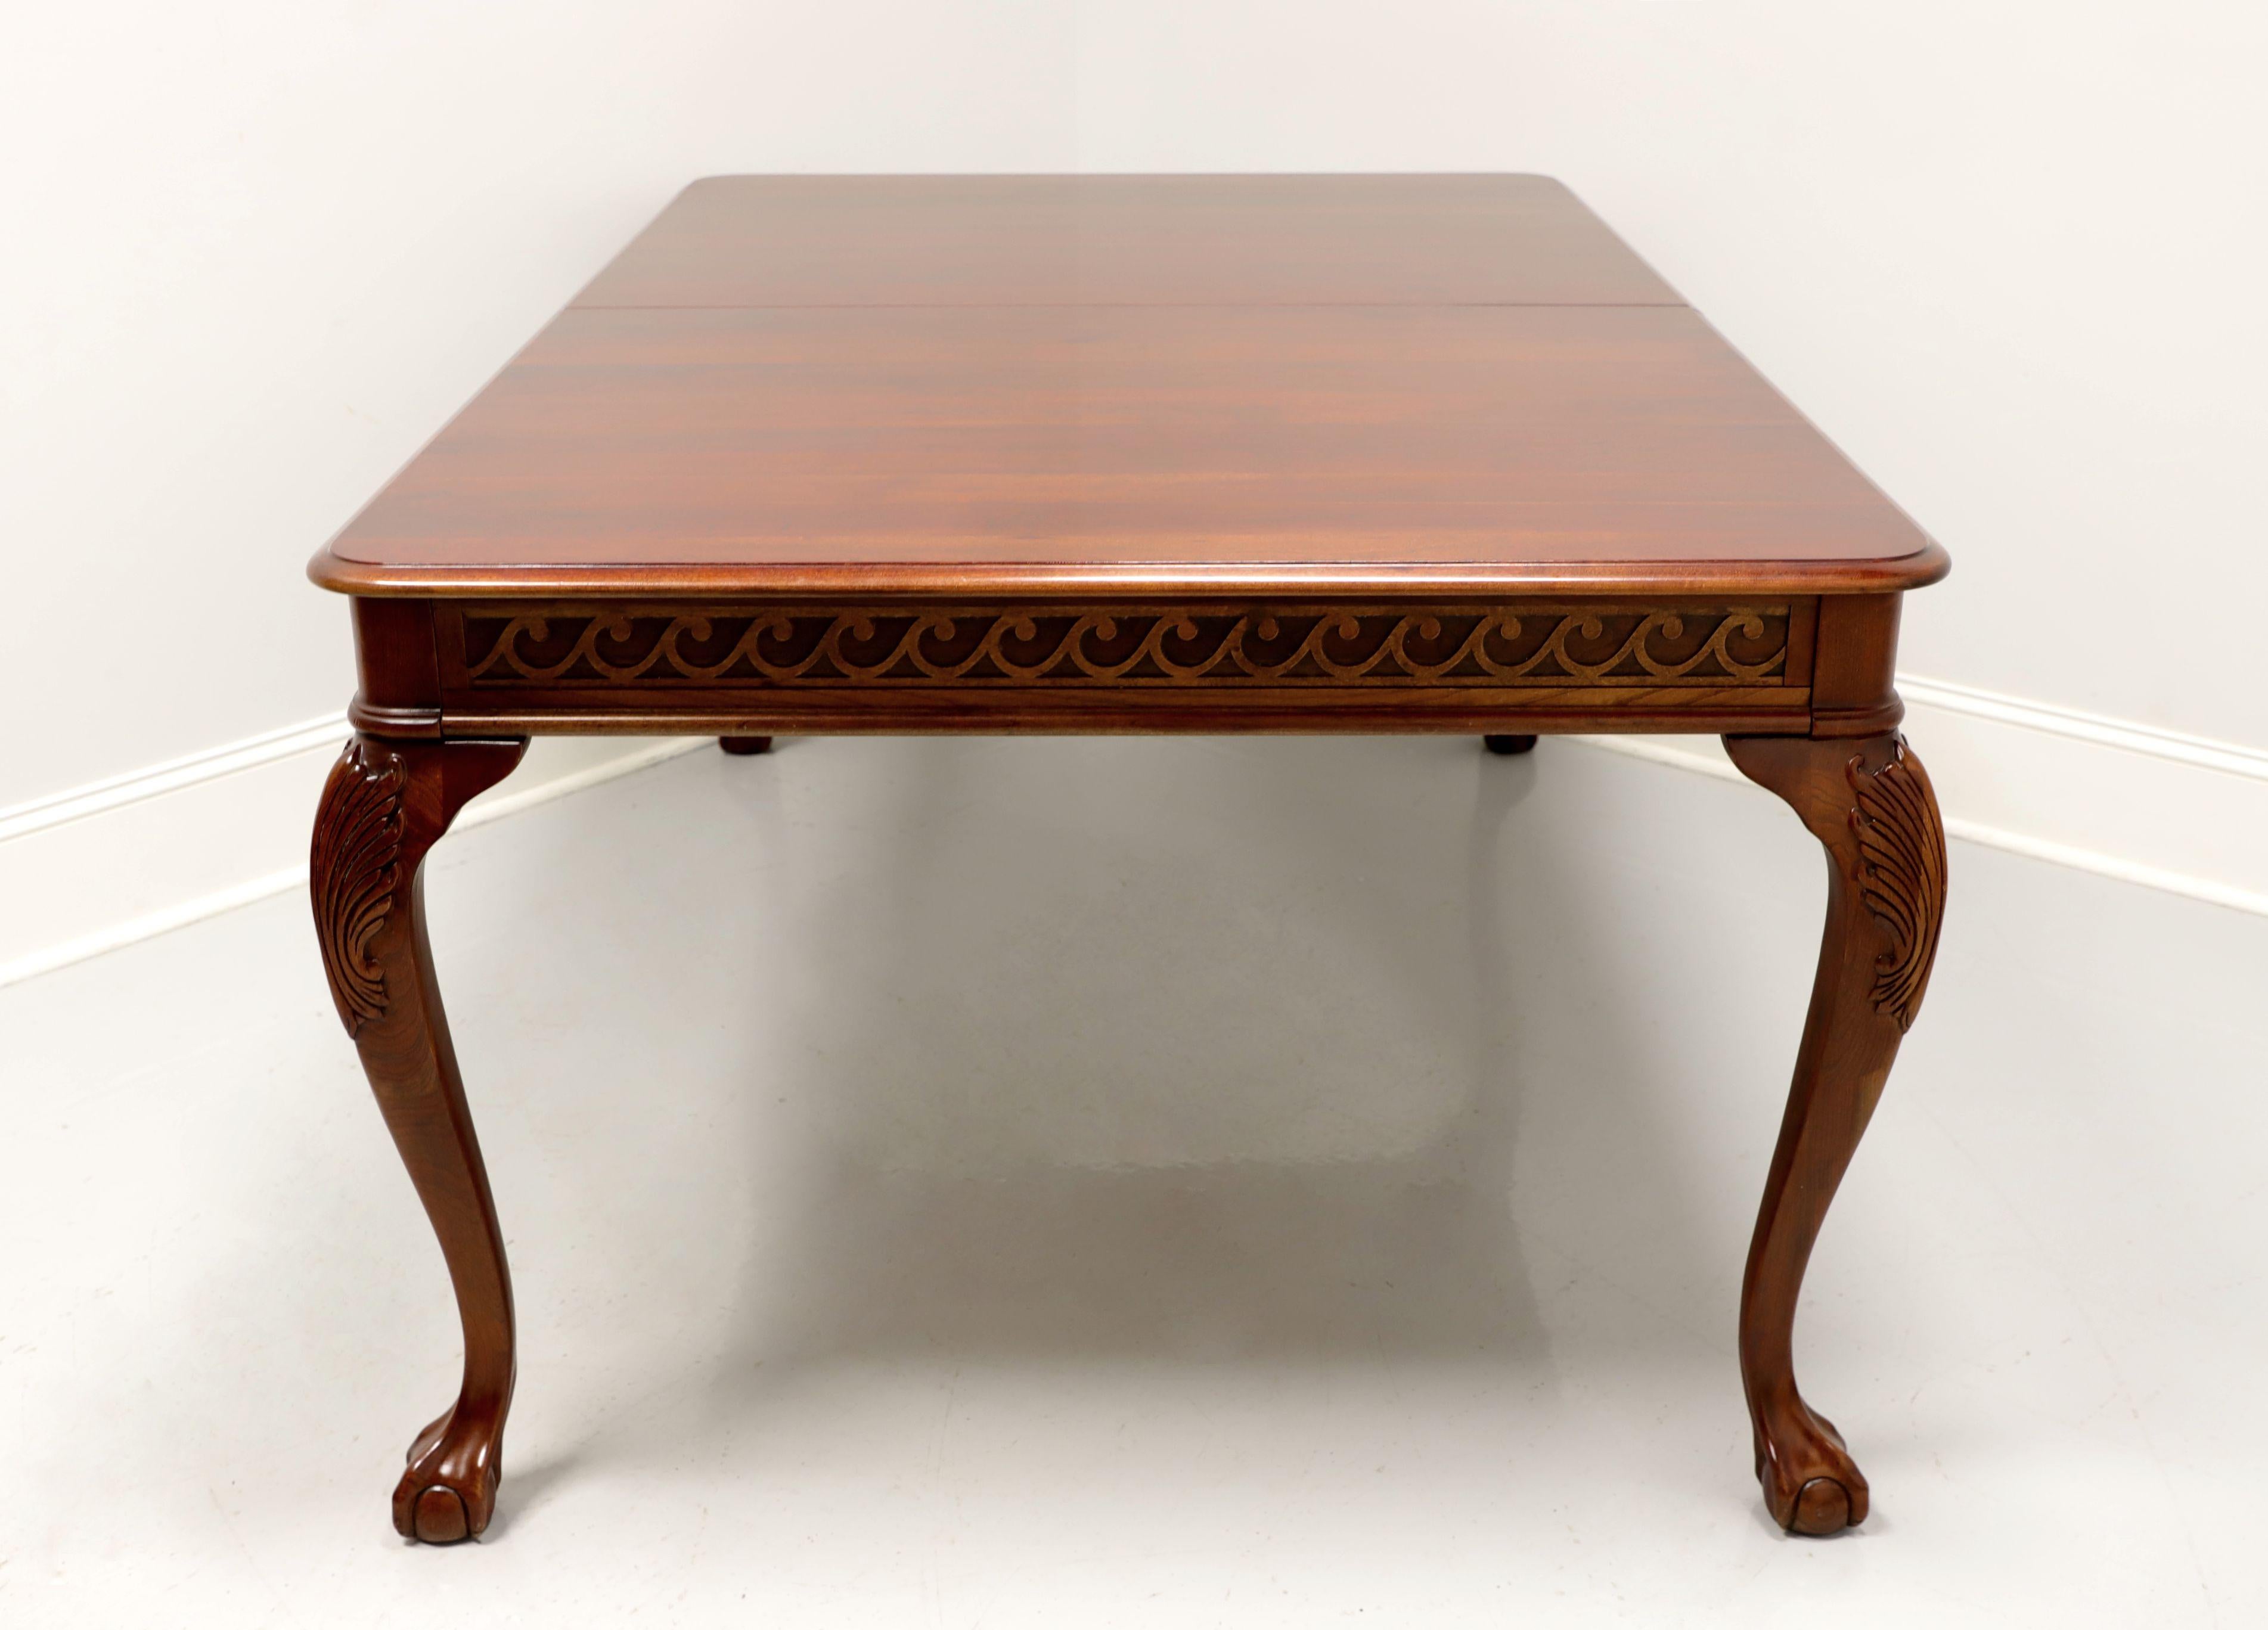 A Chippendale style rectangular dining table by Pennsylvania House. Solid cherry with carved apron, carved acanthus leaf to knees and ball in claw feet. Metal expansion sliders. Includes two extension leaves. Made in the USA, in the early 21st